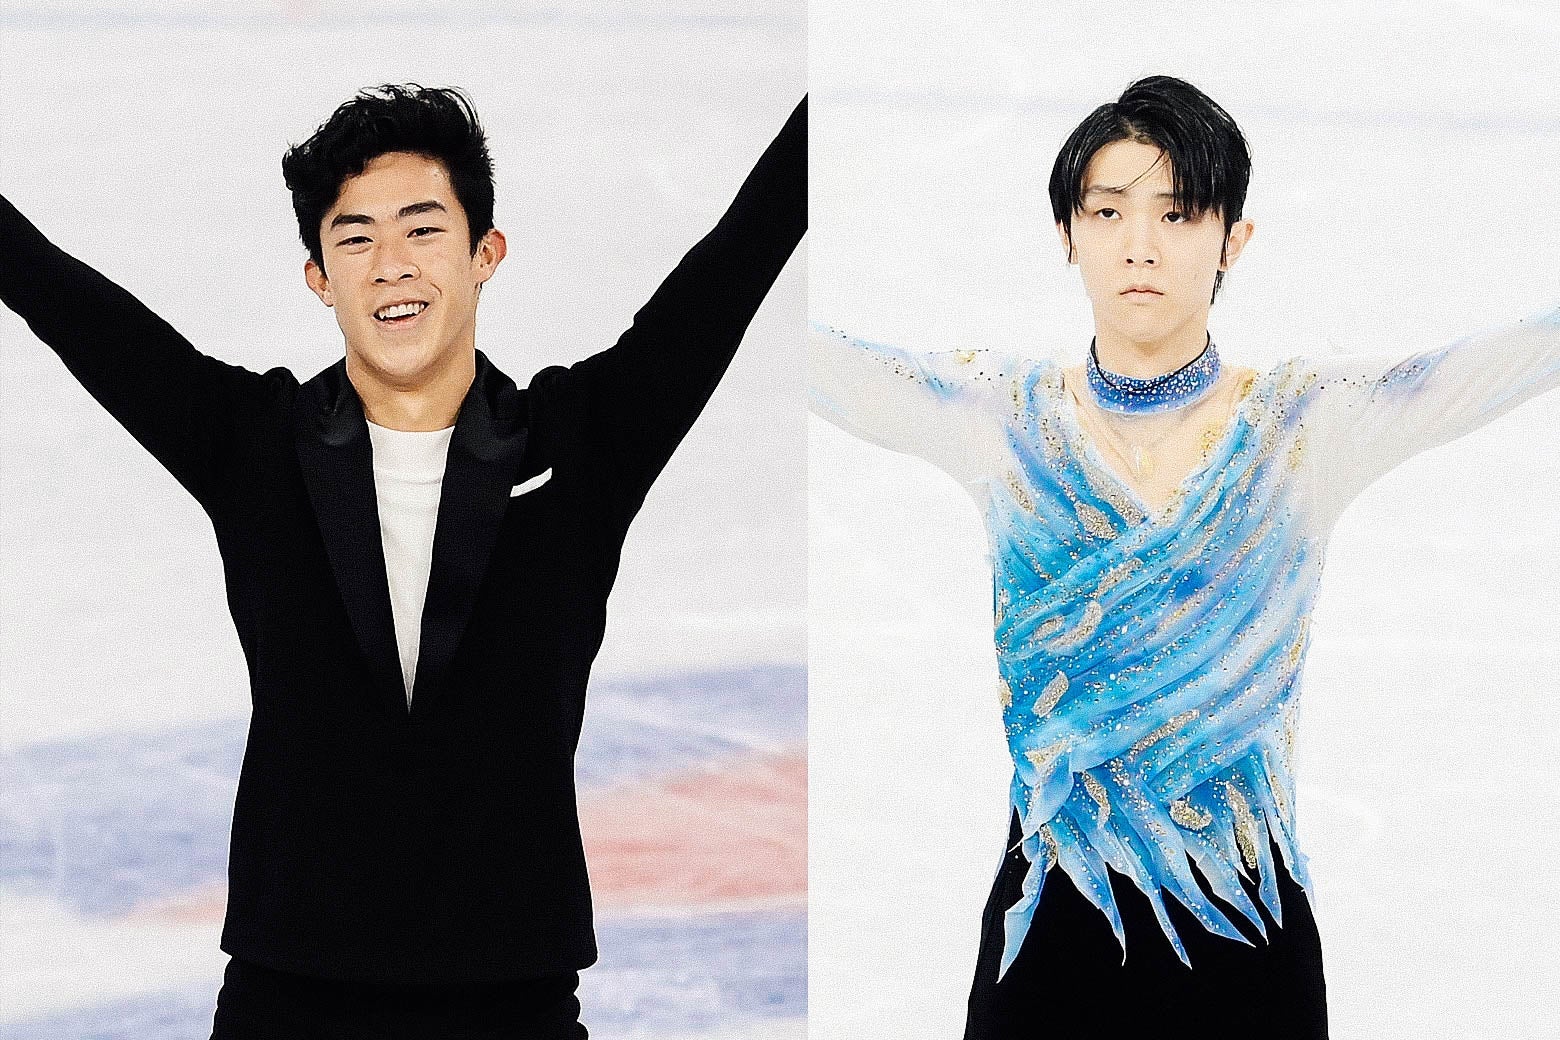 Chen grinning and Hanyu frowning as they both raise their arms on the ice in separate photos side by side